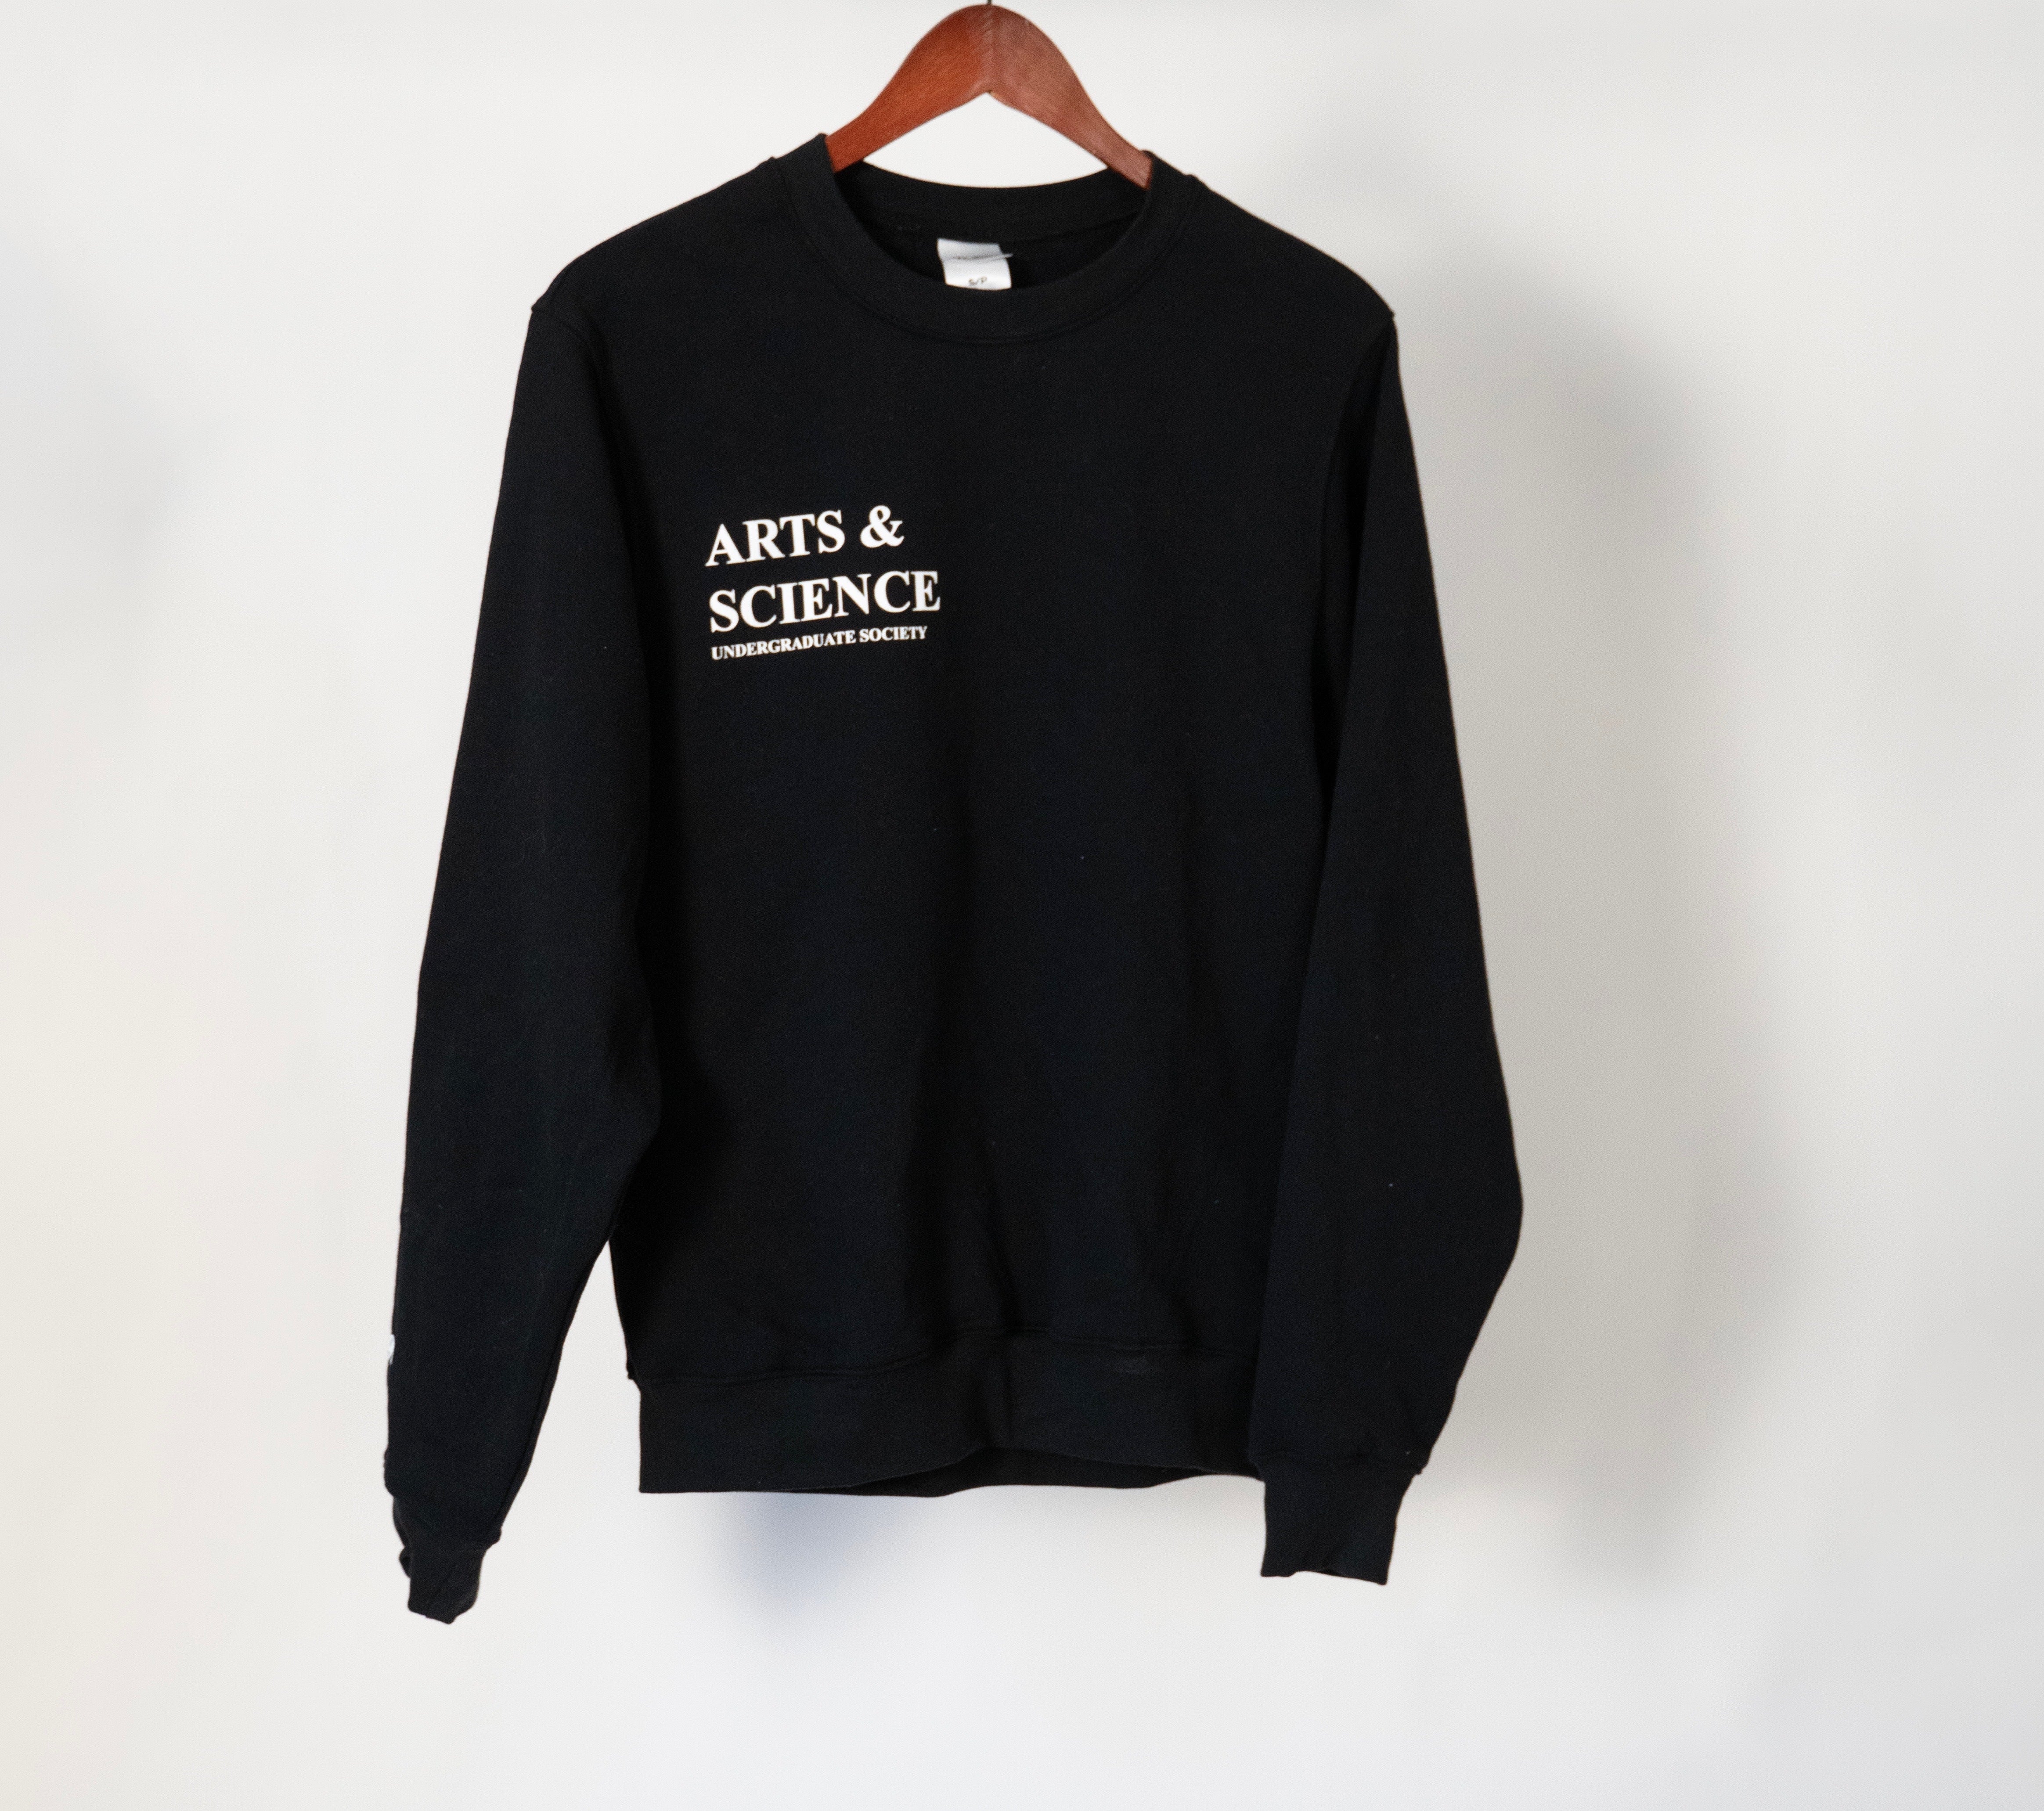 Clothing – The Arts & Science Undergraduate Society Store